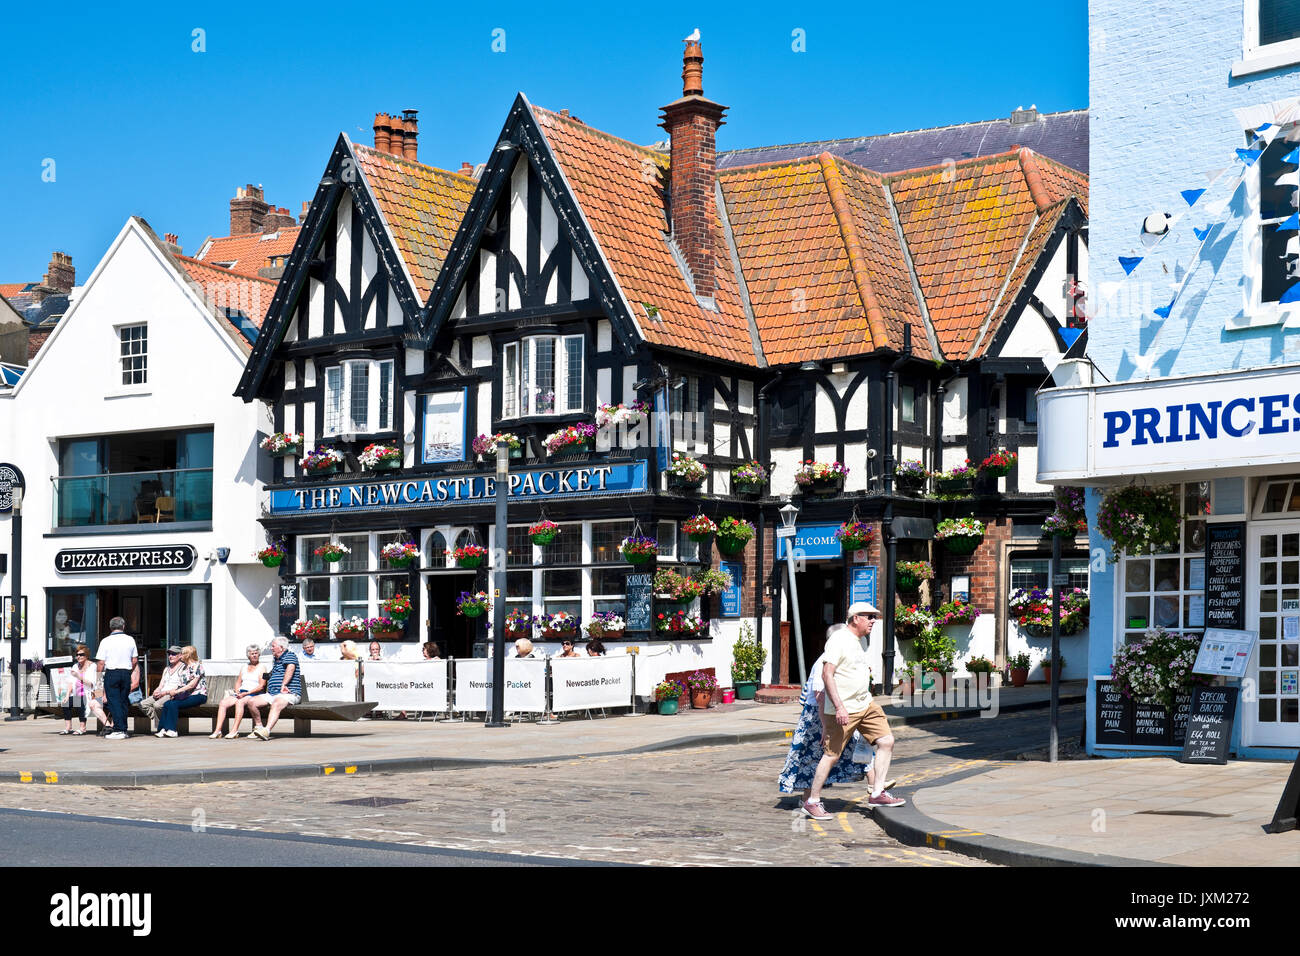 The Newcastle Packet Inn pub exterior in summer South Bay Scarborough seafront North Yorkshire England UK United Kingdom GB Great Britain Stock Photo